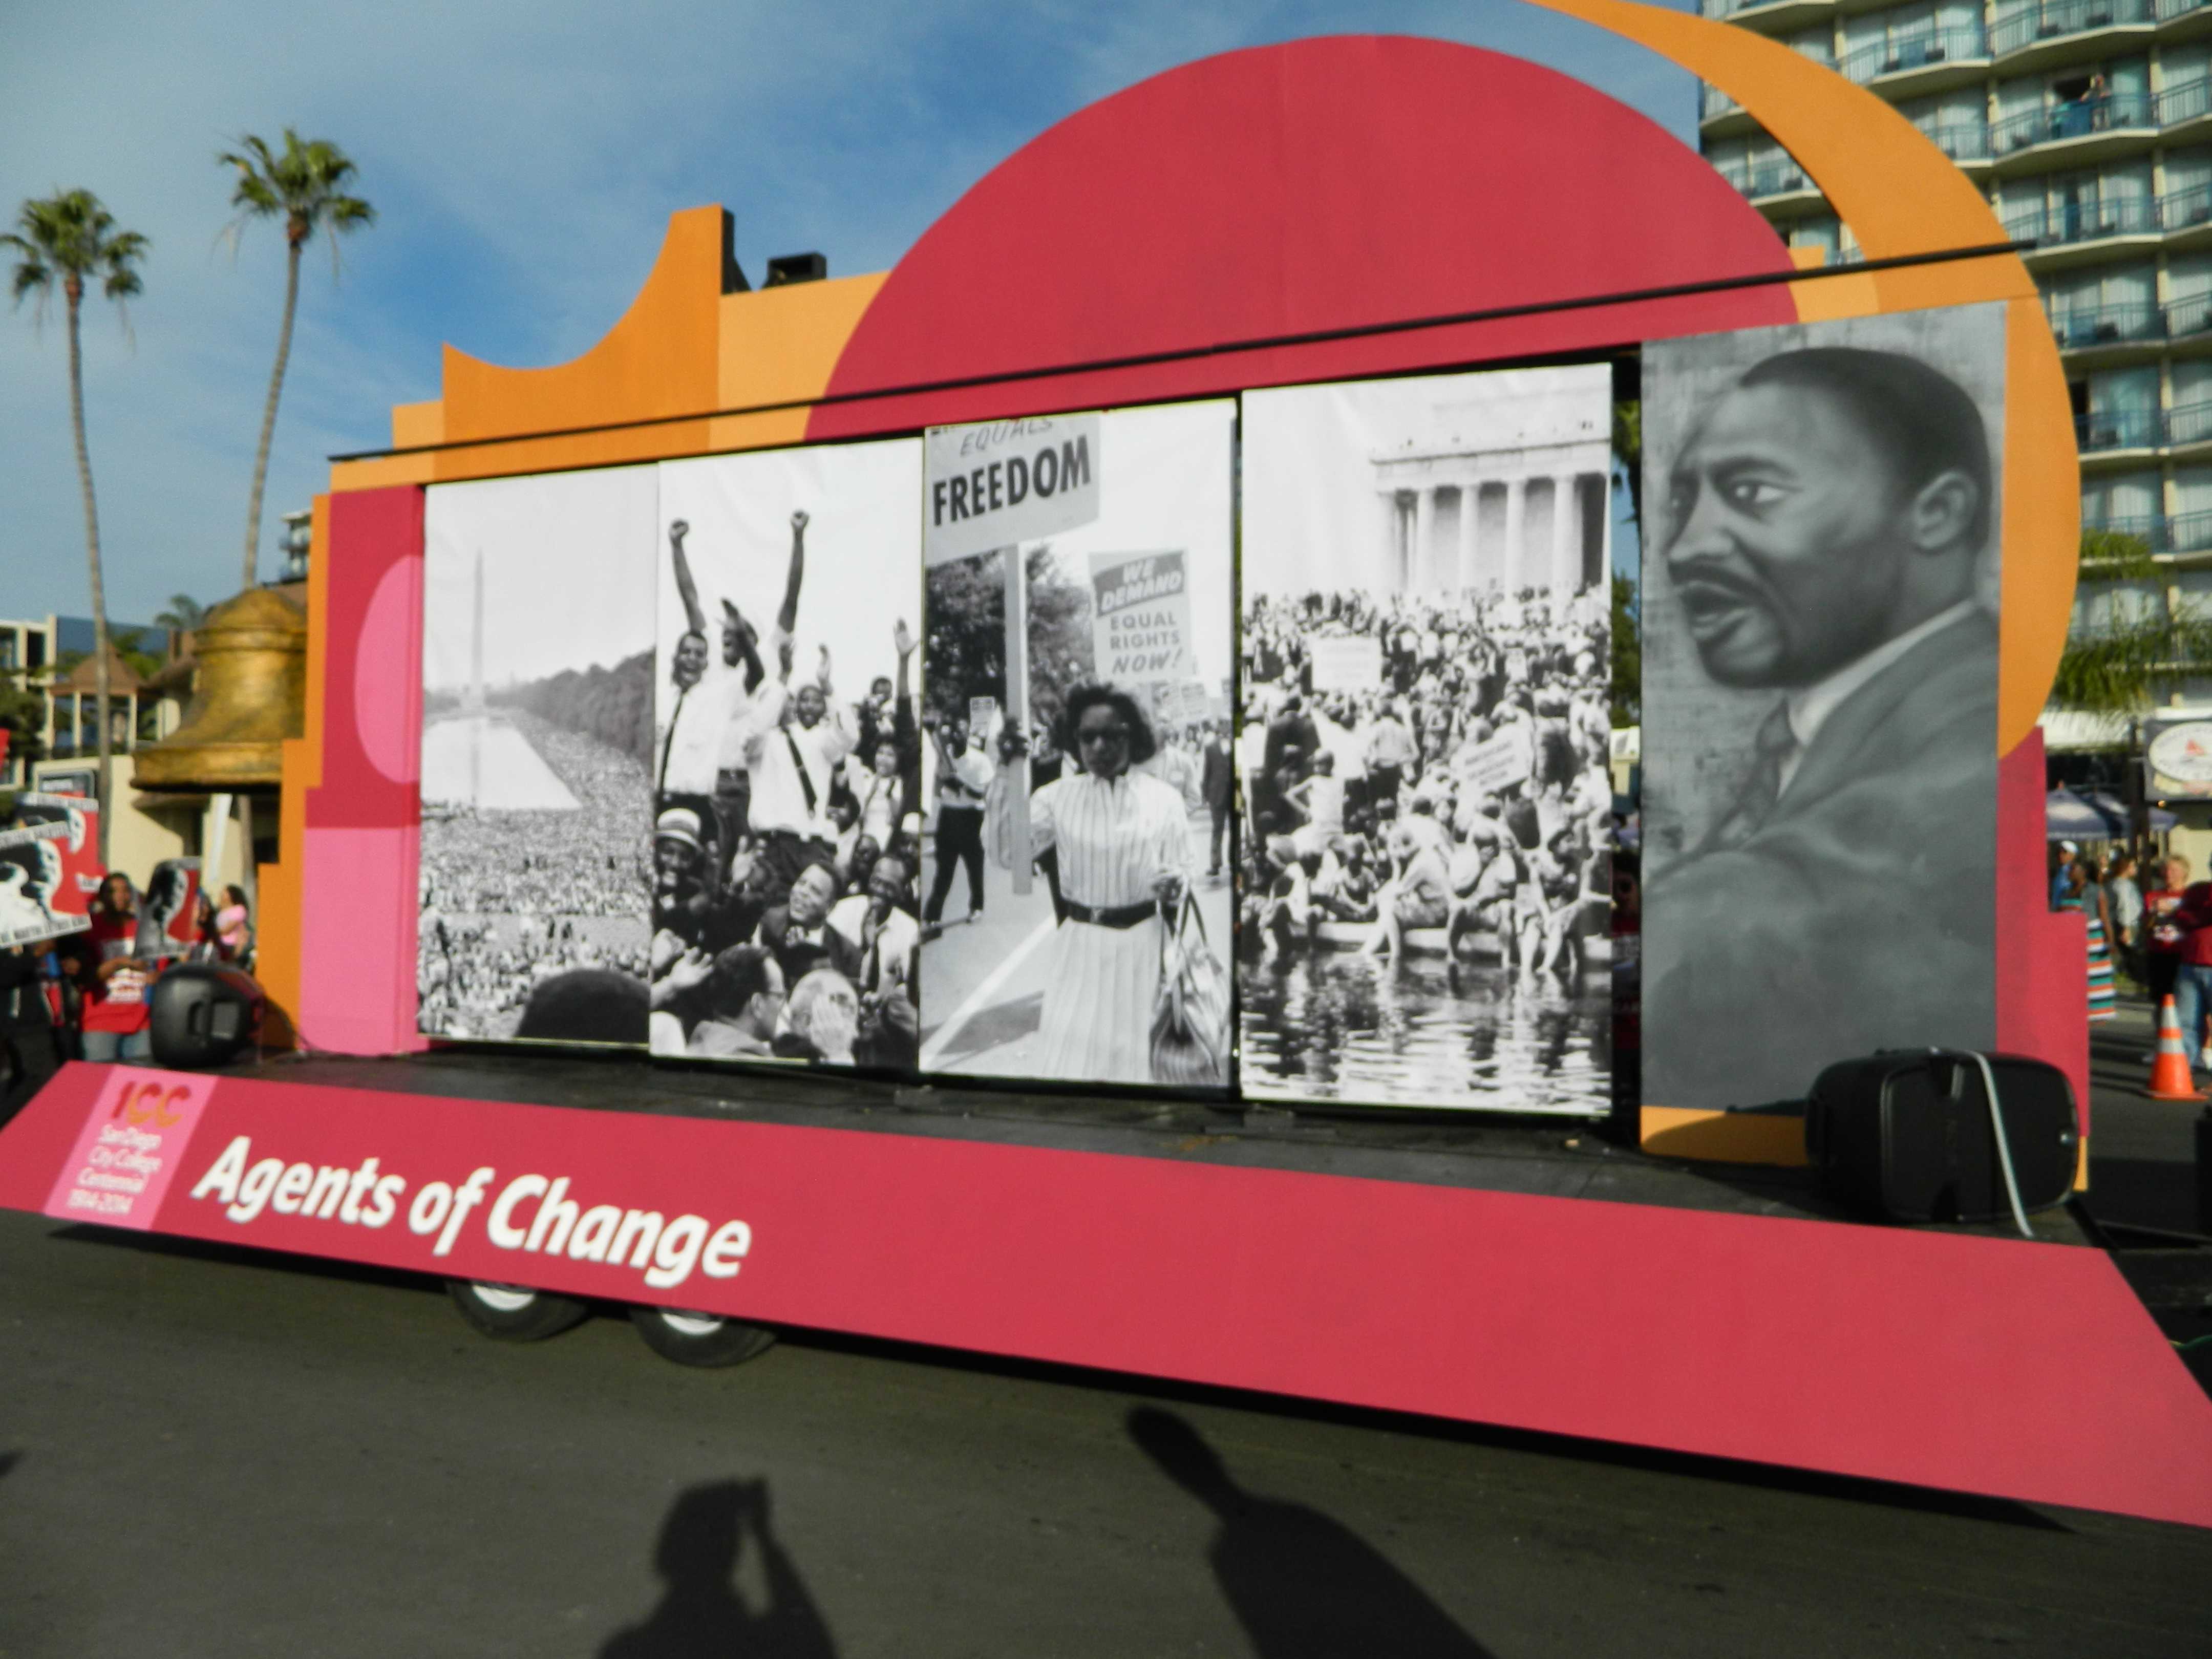 The float featured imagery from the 1964 March on Washington and a rendering of Dr. Luther King Jr. by the City College graphic design department.Photo credit: Christopher Handloser